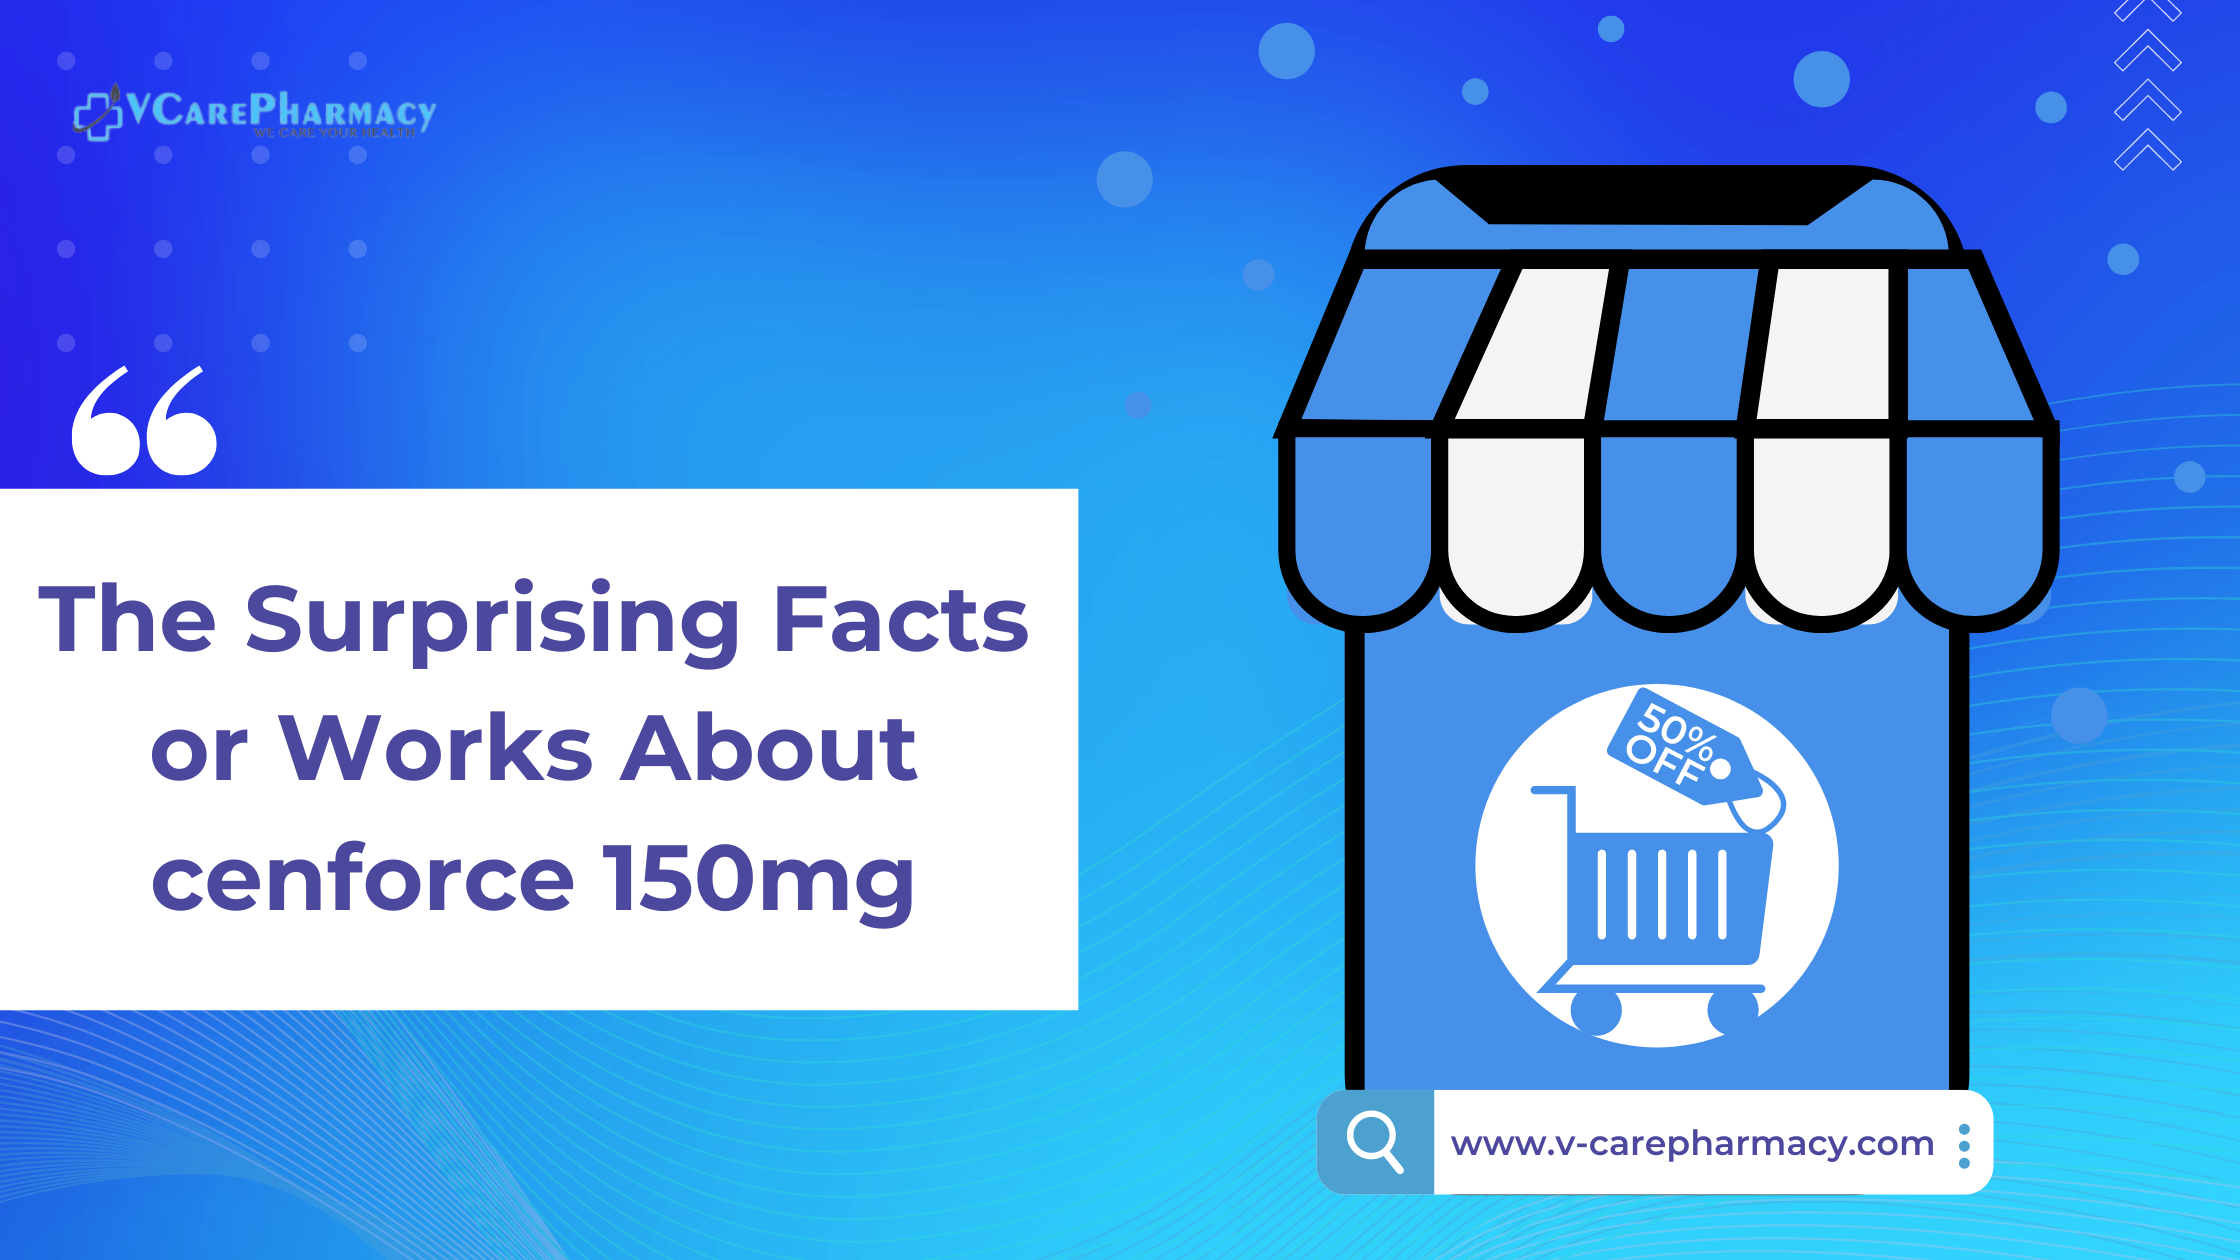 The Surprising Facts or Works About cenforce 150mg